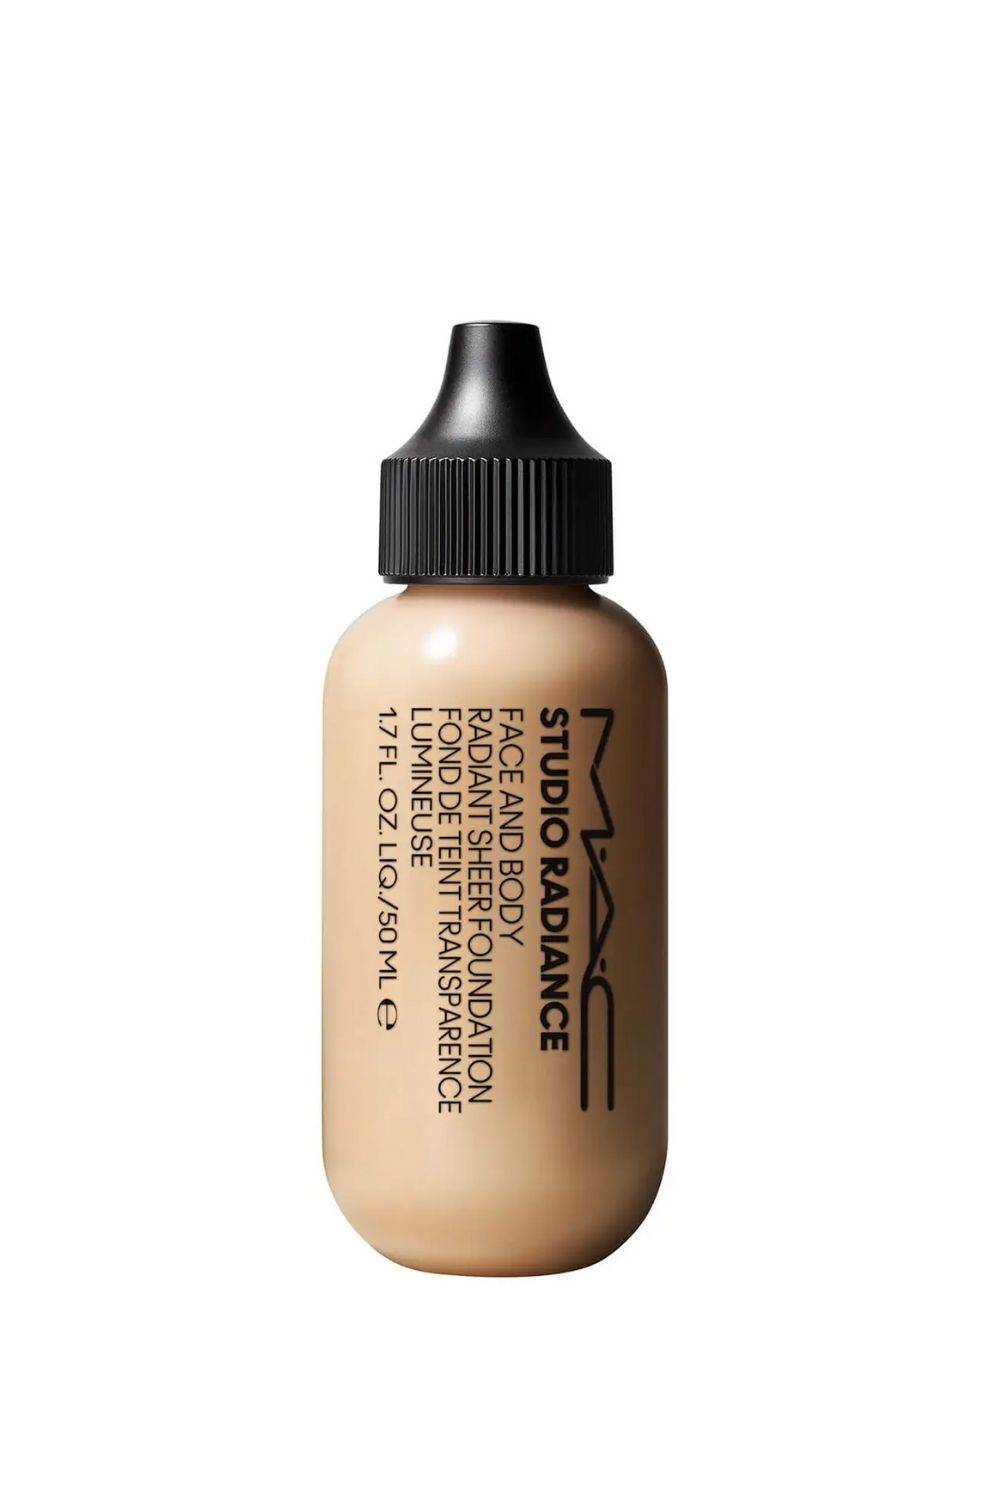 MAC Studio Face and Body Radiant Sheer Foundation 